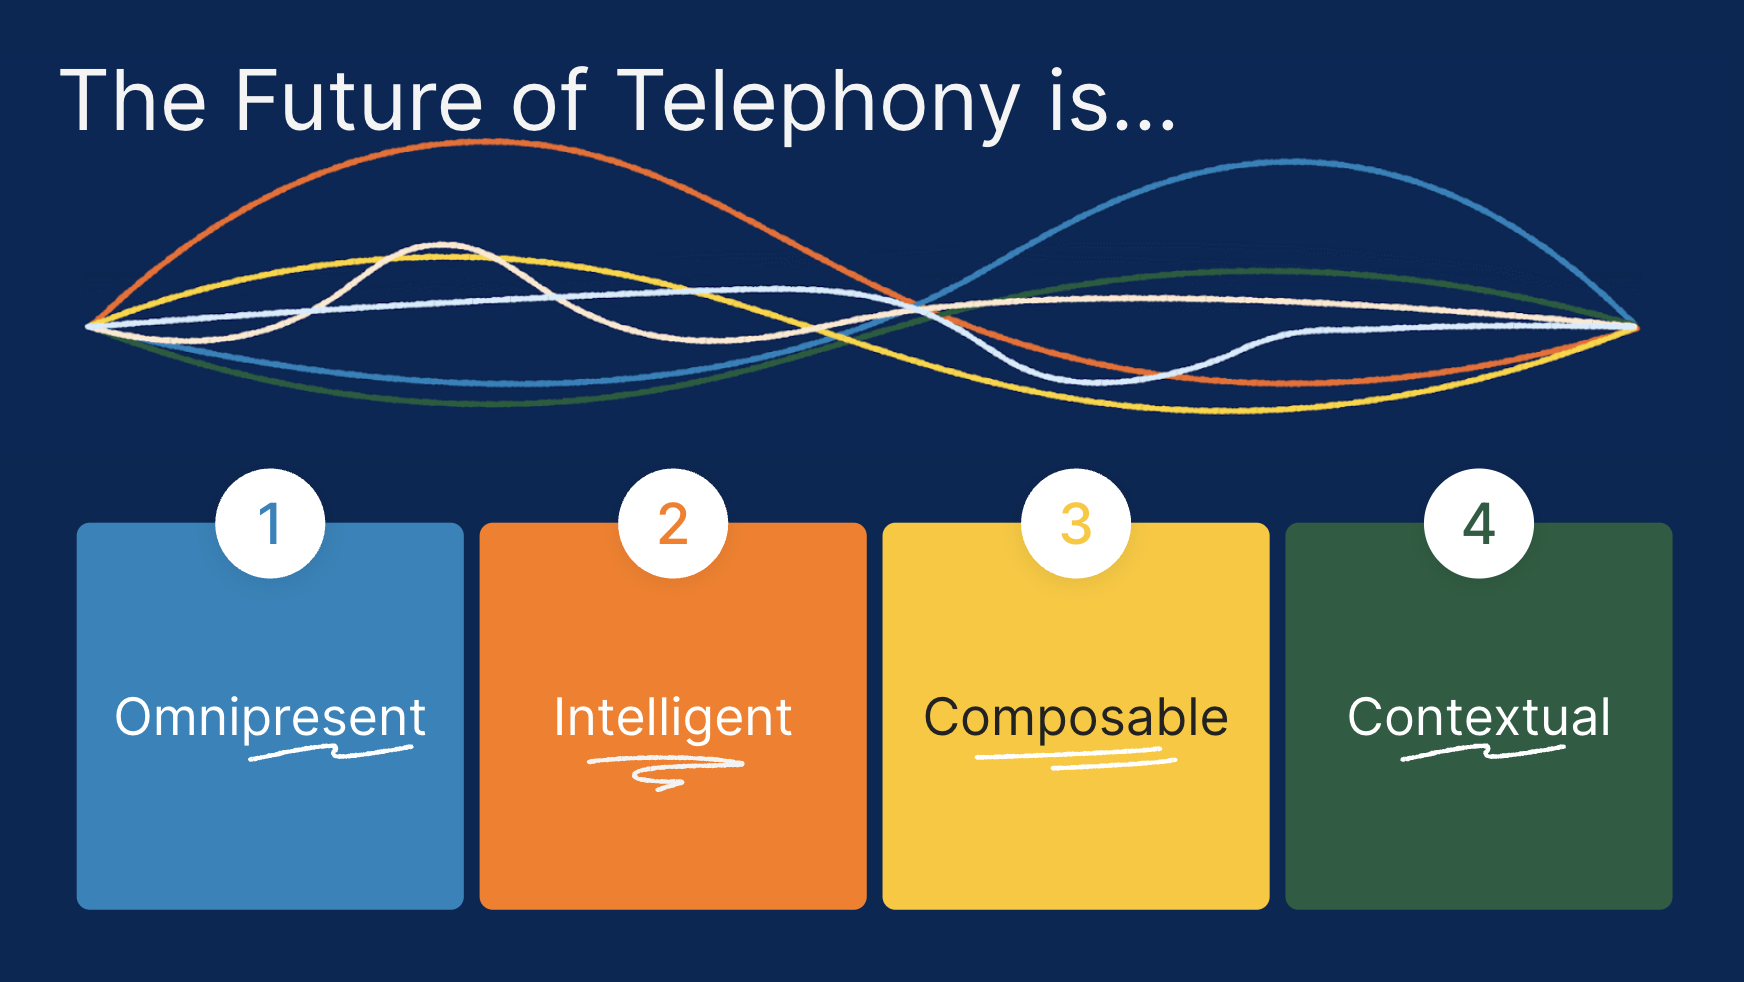 Graphic that says "The future of telephony is omnipresent, intelligent, composable, contextual"